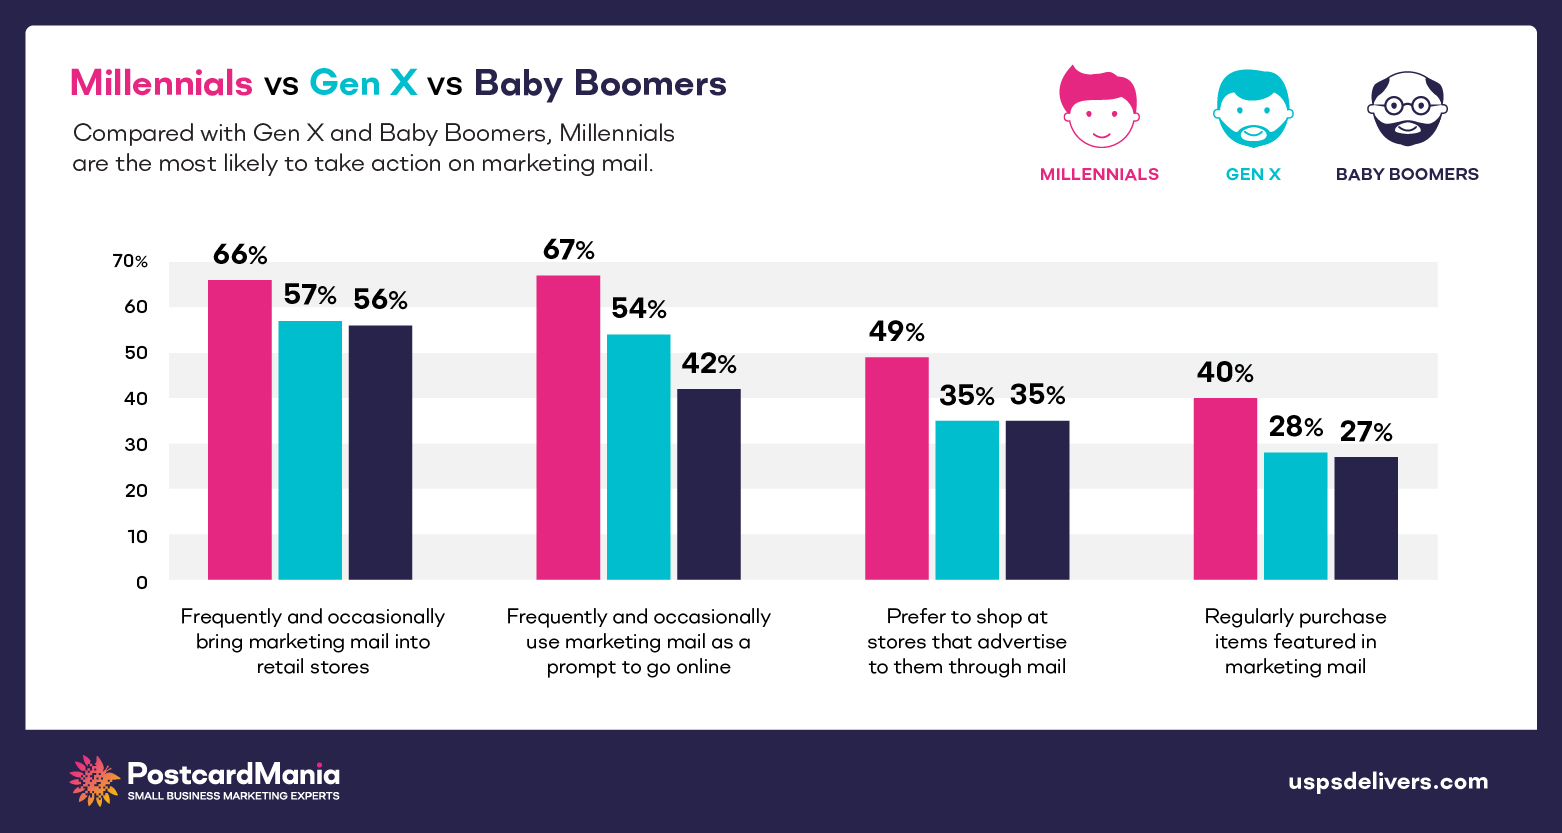 millennials vs gen x vs baby boomers likeliness to take action on marketing mail